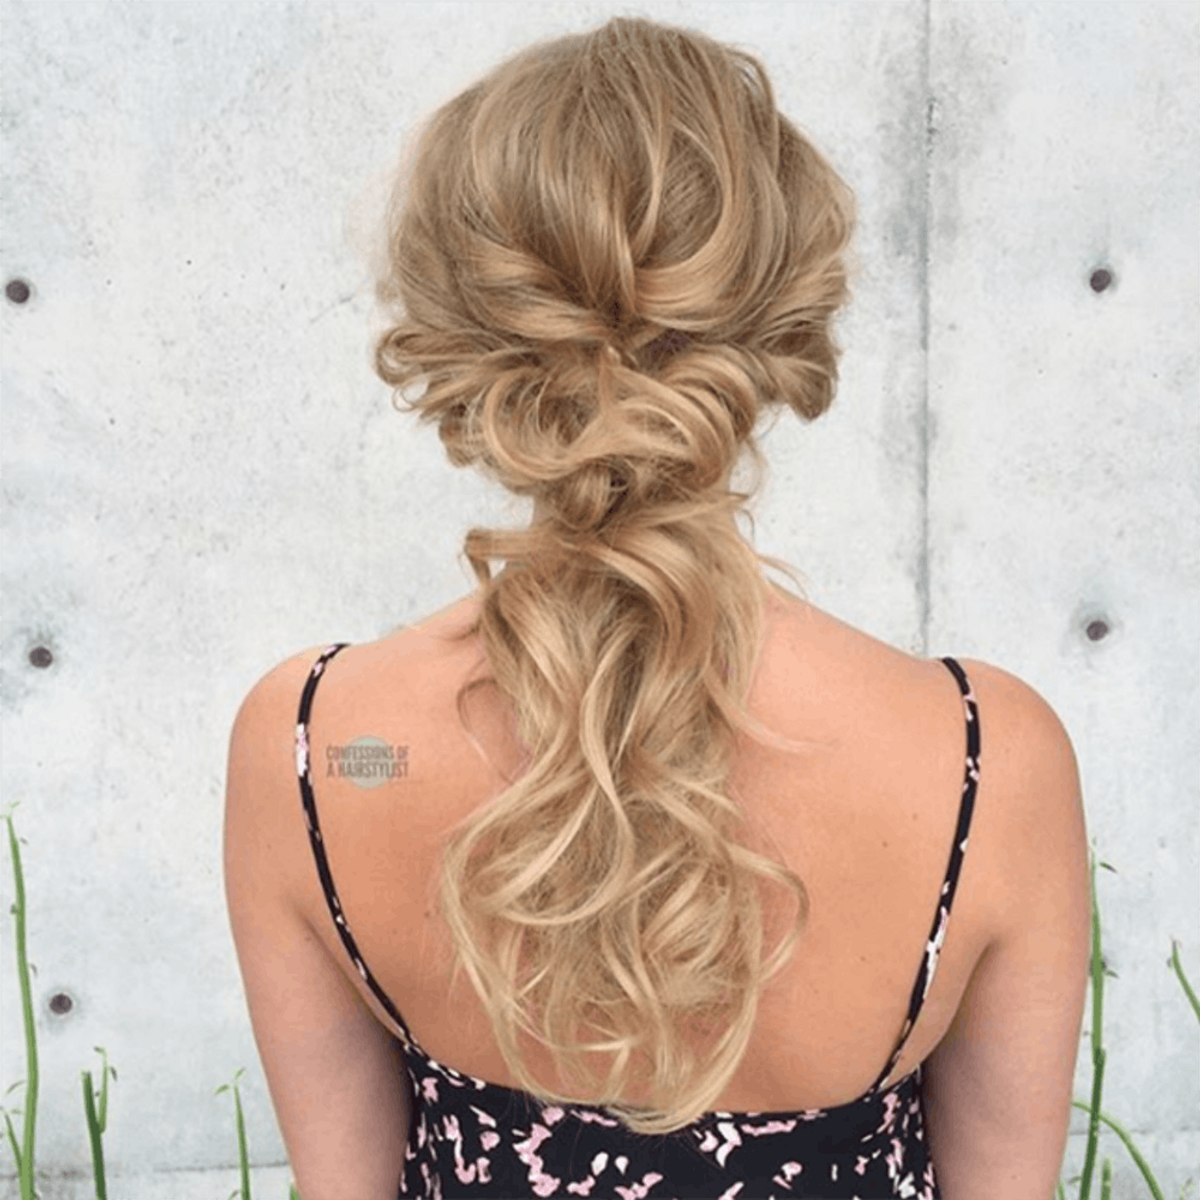 These Twisted Hairstyles Will Make You Say Buh-Bye to Braids